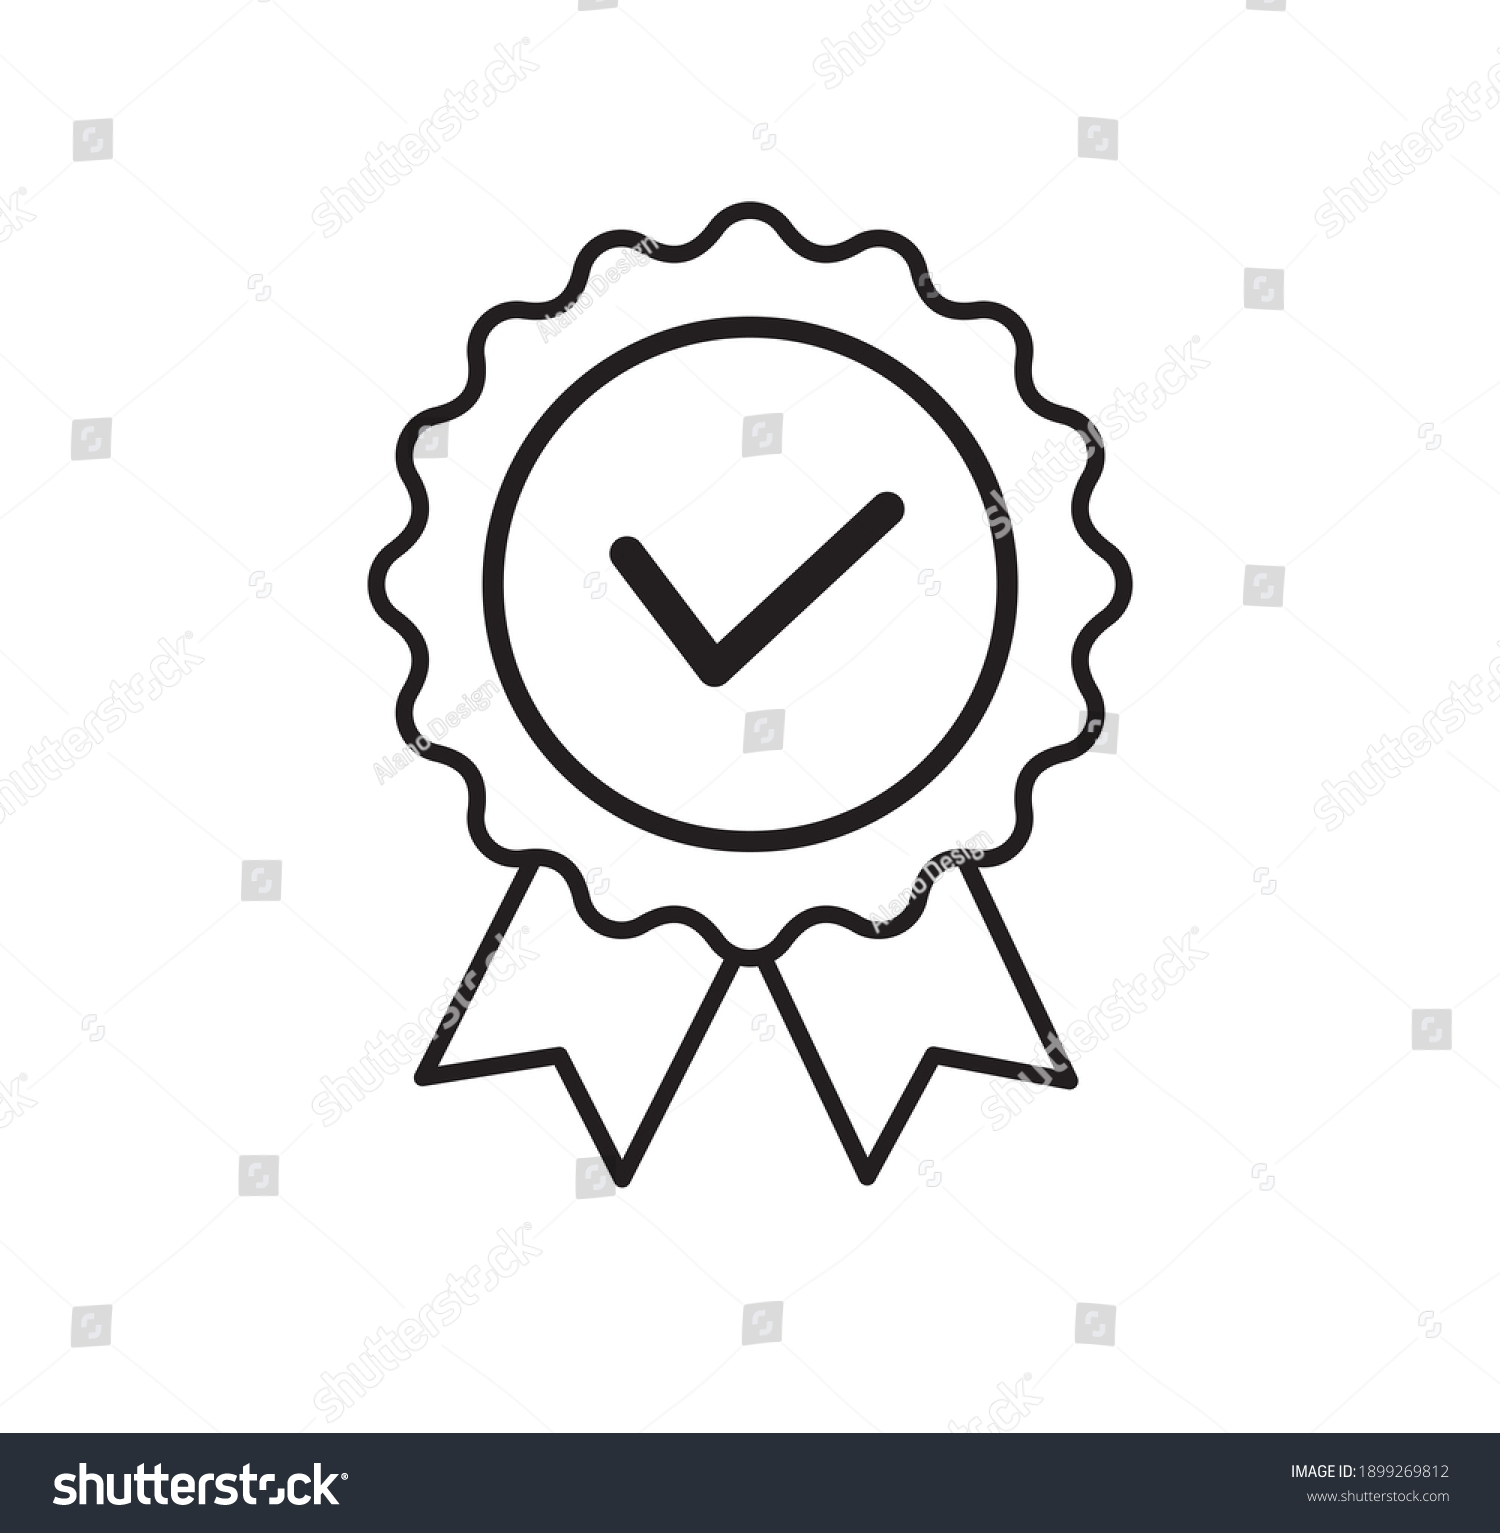 Quality certificate icon isolated on white background. Rosette icon Flat style. Vector illustration #1899269812